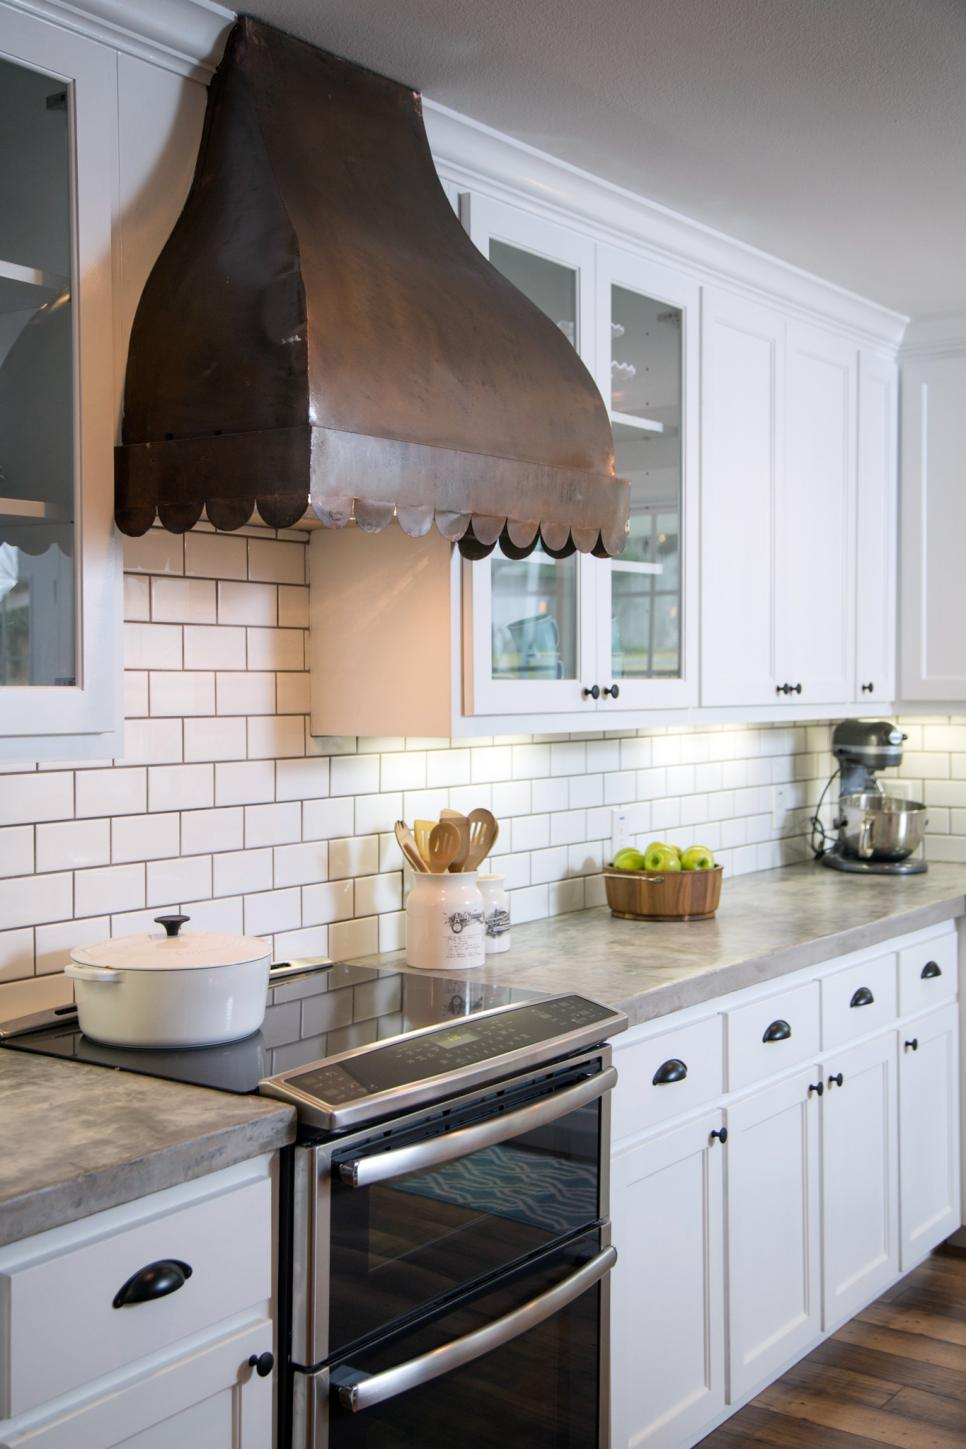 A rustic range hood with scalloped trim in kitchen with white cabinets and white tile backsplash.